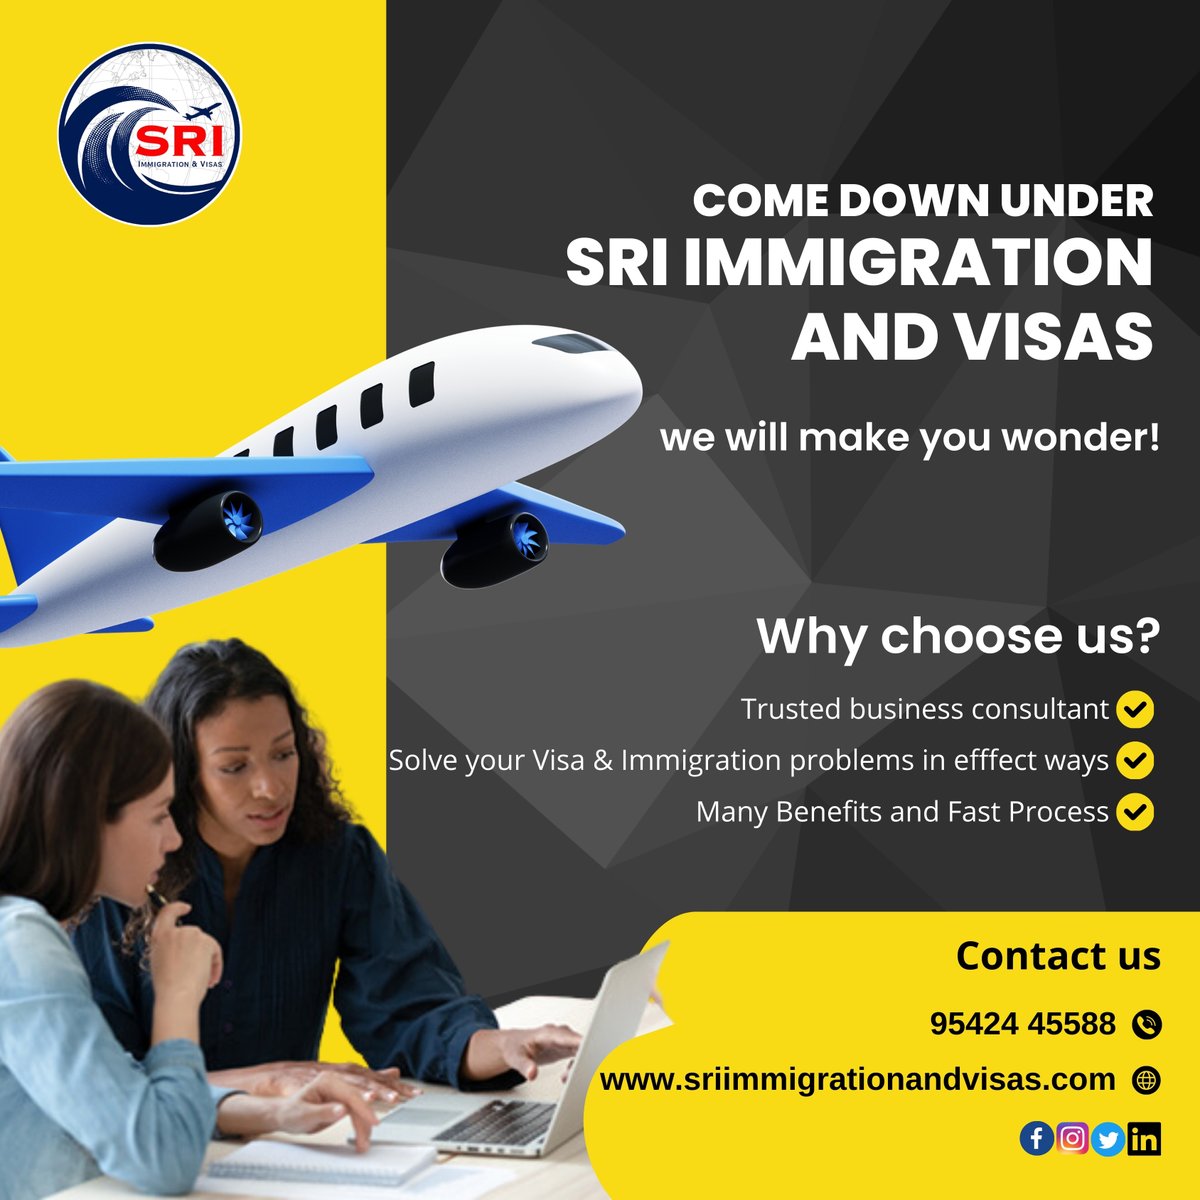 Unlock wonders Down Under with Sri Immigration and Visas! 🌏✈️ Trusted consultants, efficient solutions, and a fast process await.

#DownUnderDreams #Sriimmigrationandvisas #BestImmigrationConsultant #VisaConsultants #SRIImmigrations #TrustedConsultant #OpportunityAbroad